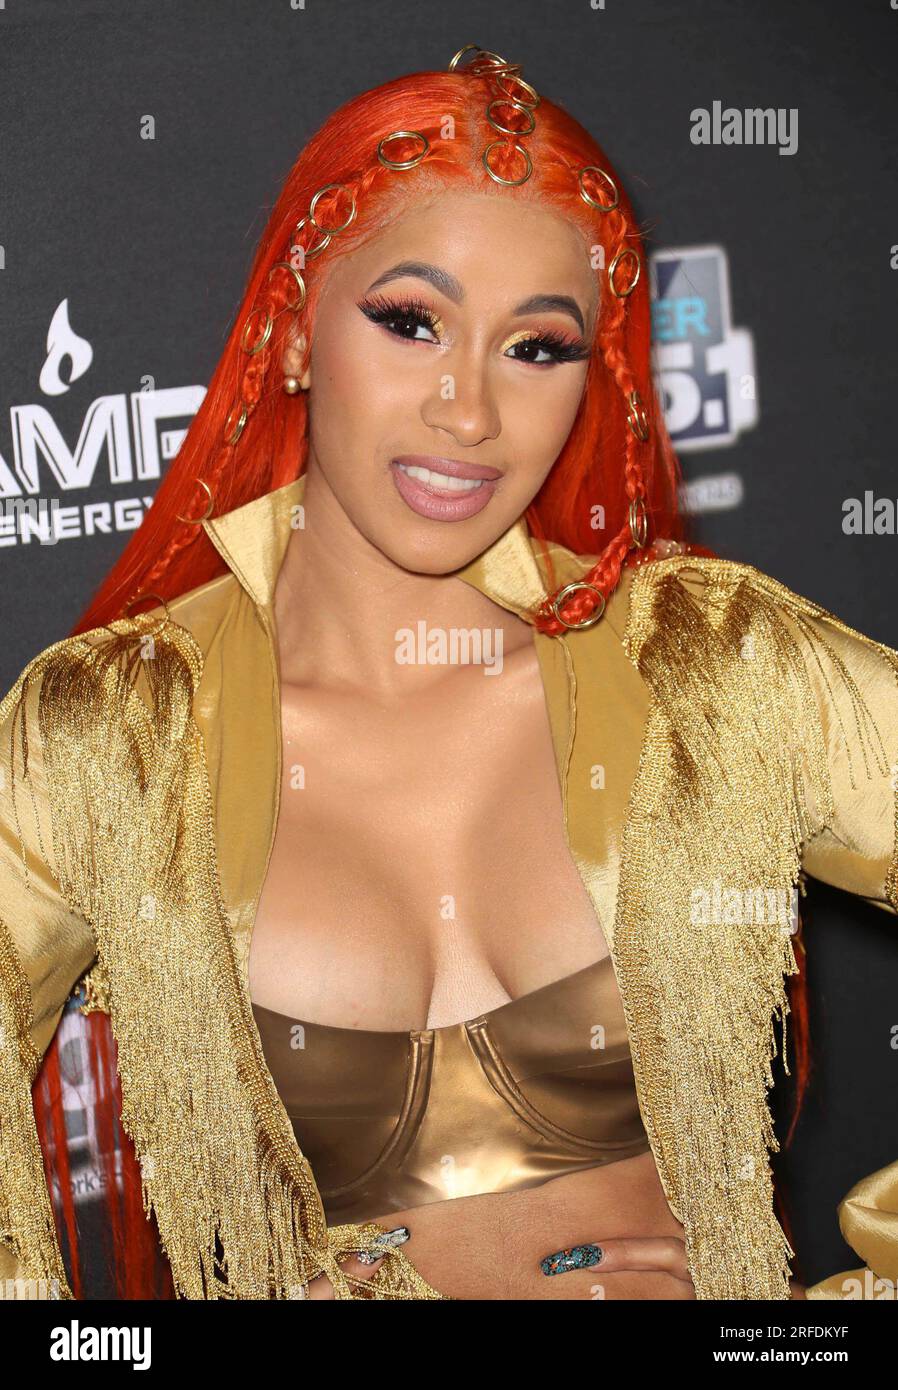 AUGUST 1st 2023: Rapper Cardi B is accused of hurling a microphone at a fan  who threw a drink at her while she was on stage during a concert  performance in Las